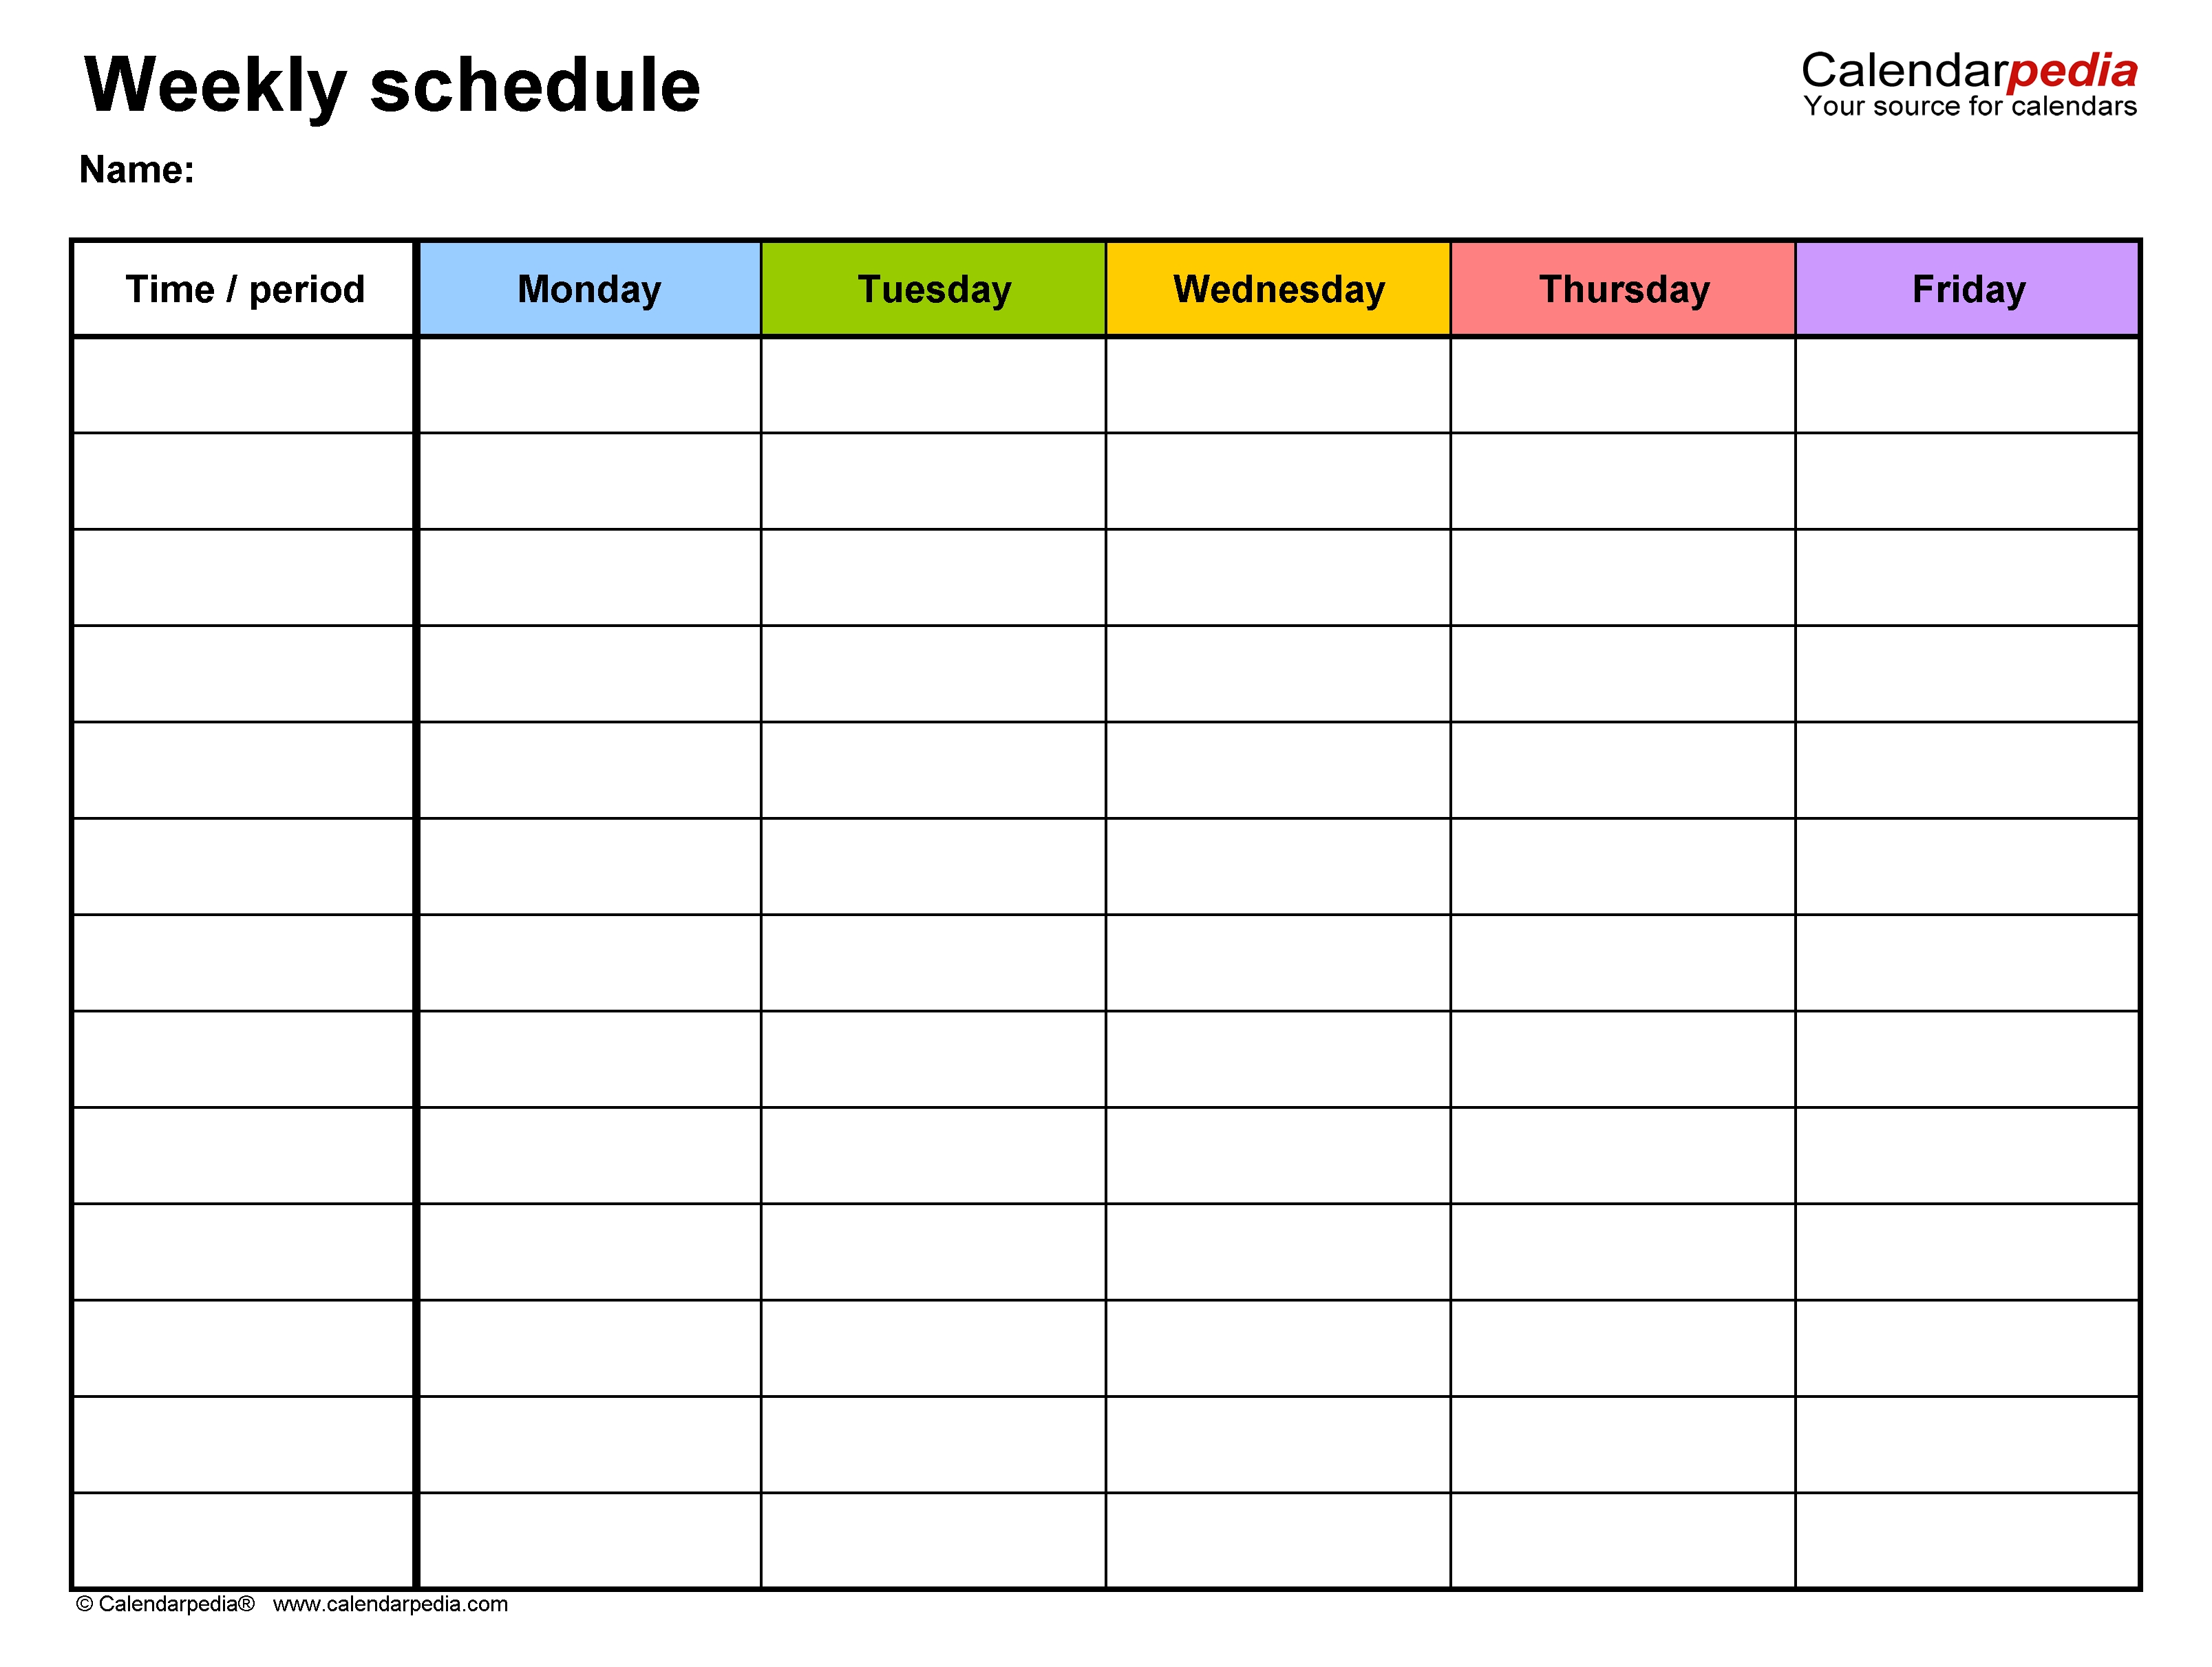 Free Weekly Schedules For Word - 18 Templates Calendar Template One Week